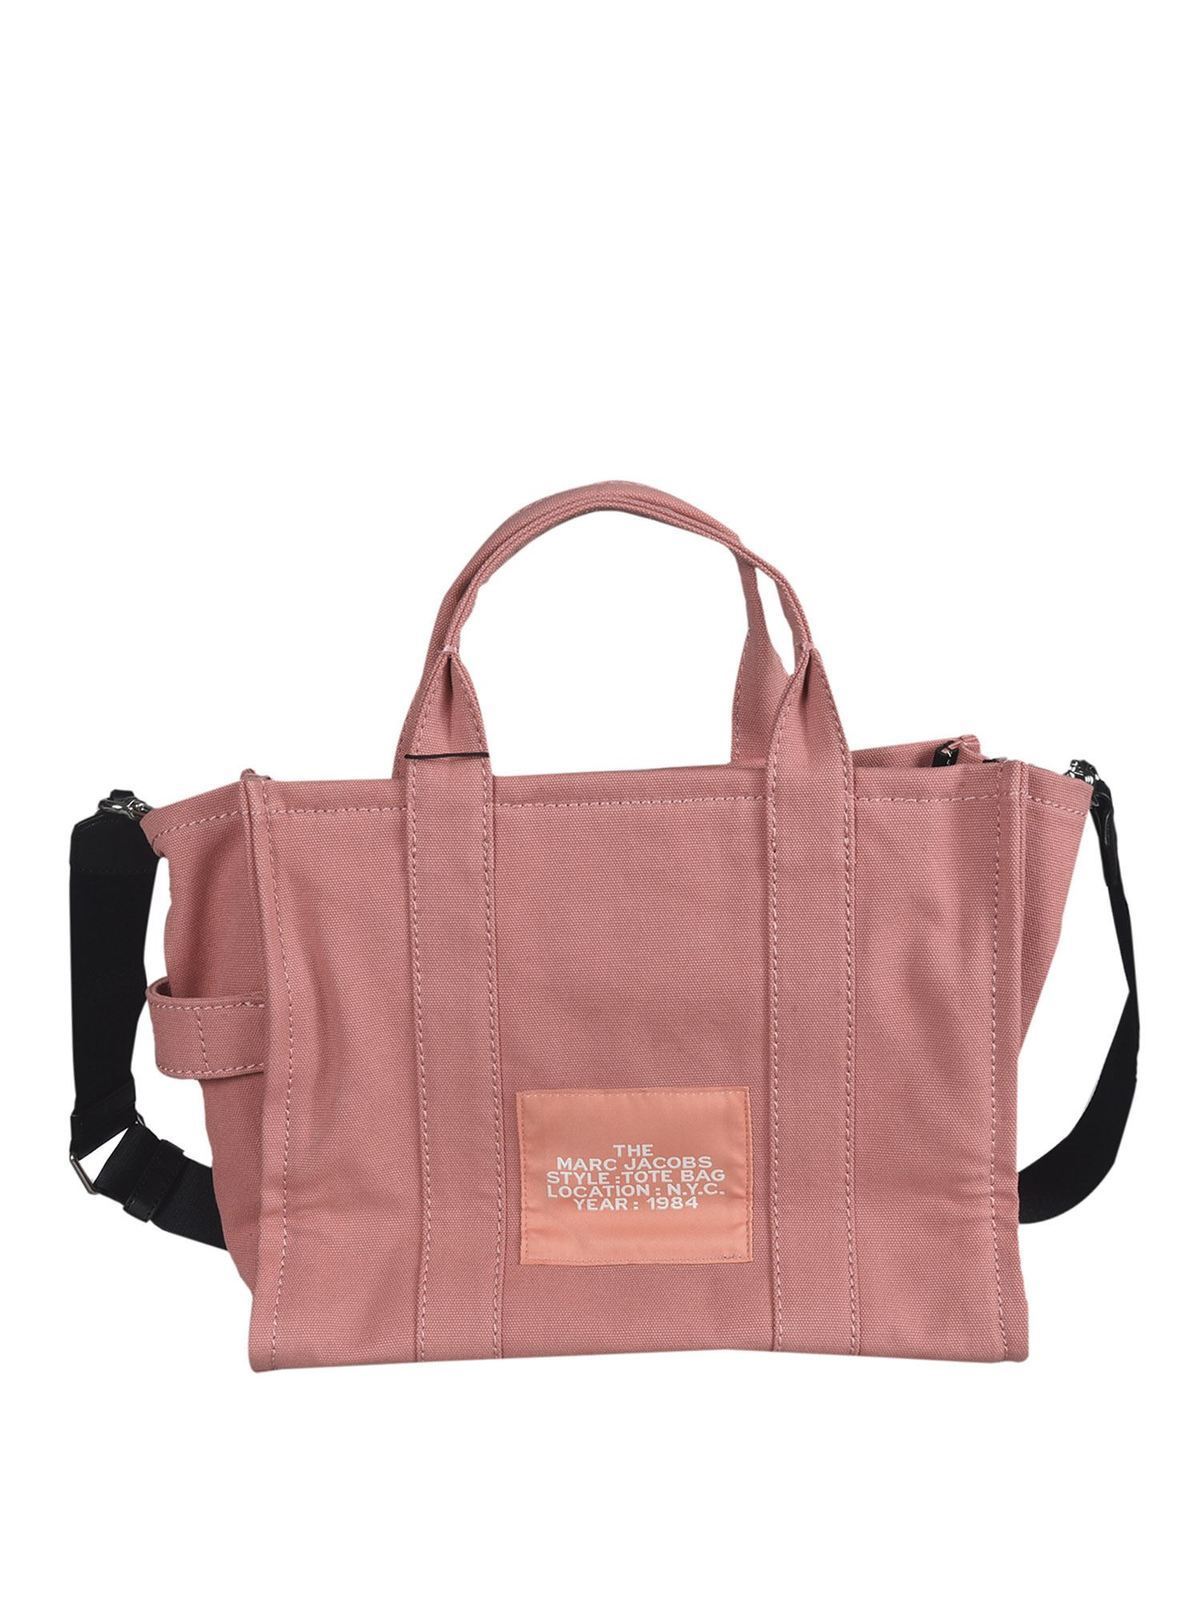 Marc Jacobs The Traveler Tote Bag - Pink